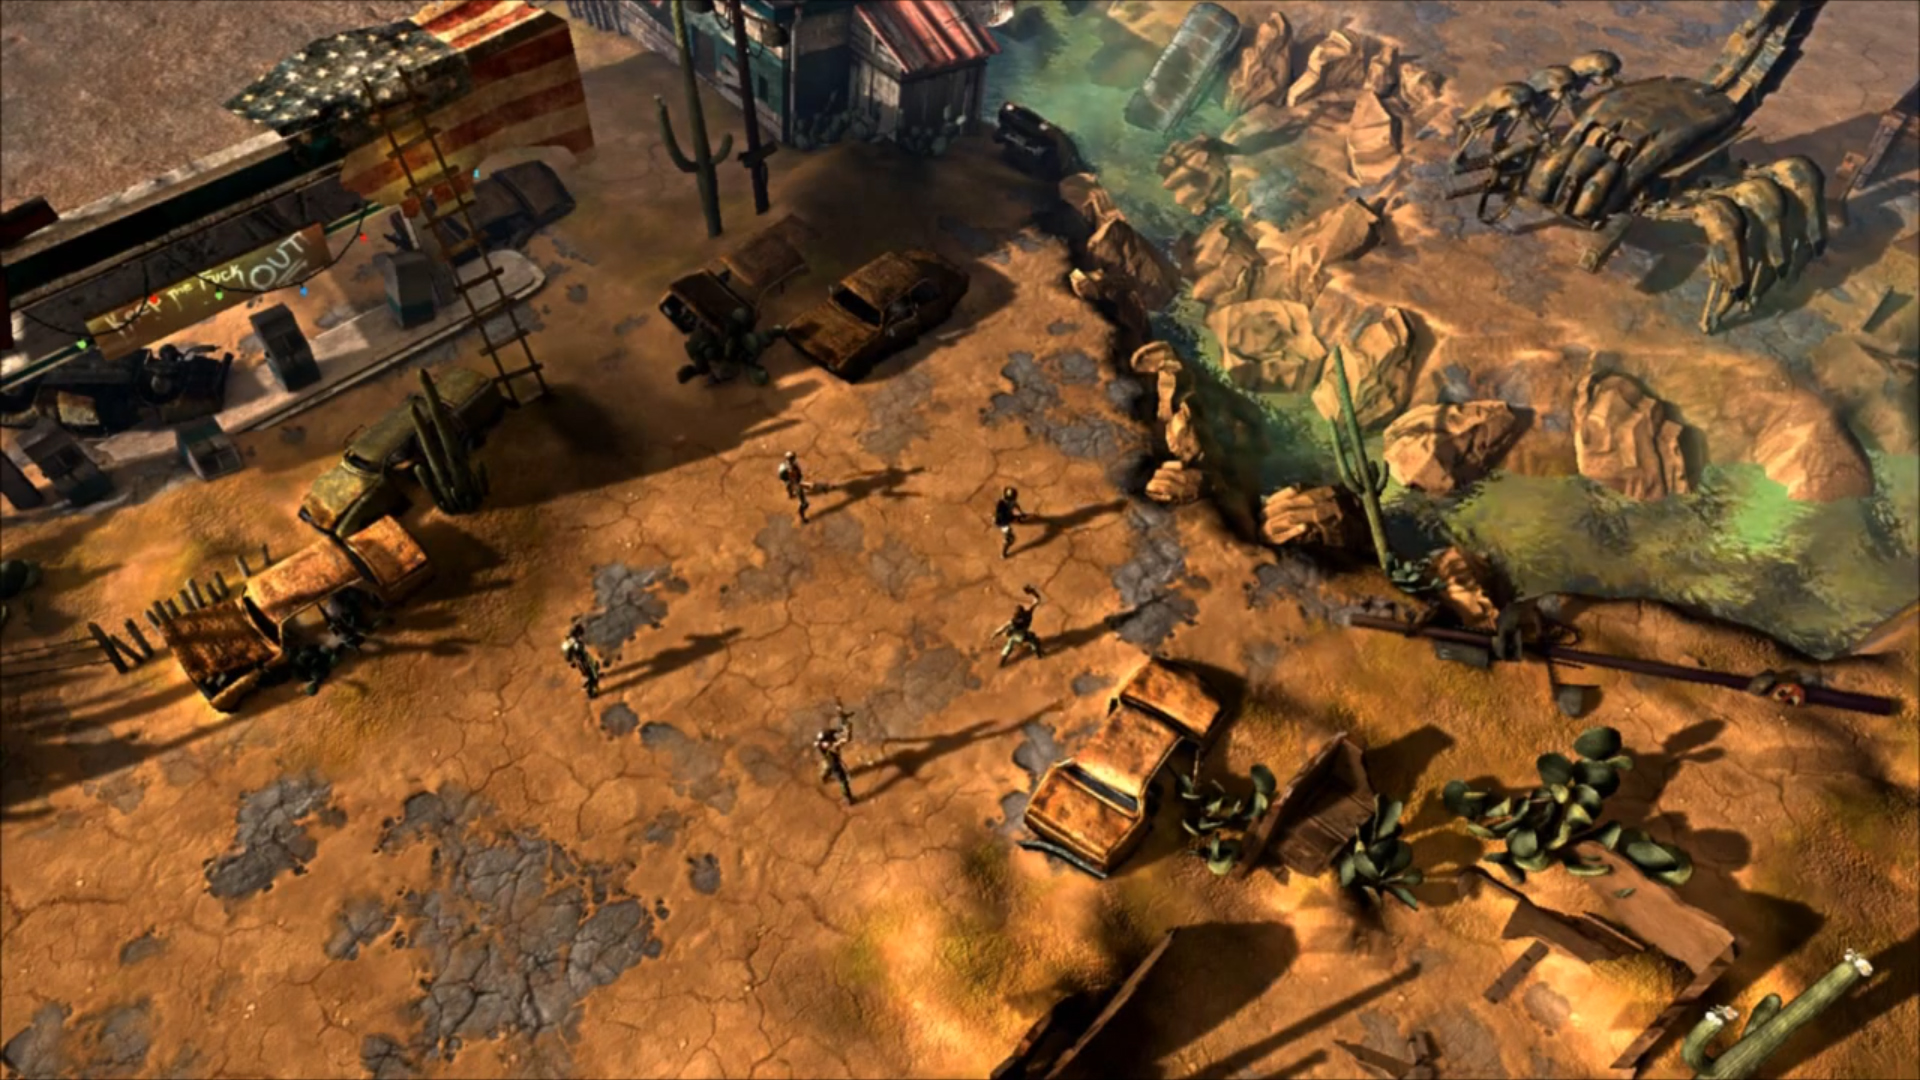 HD Quality Wallpaper | Collection: Video Game, 1920x1080 Wasteland 2